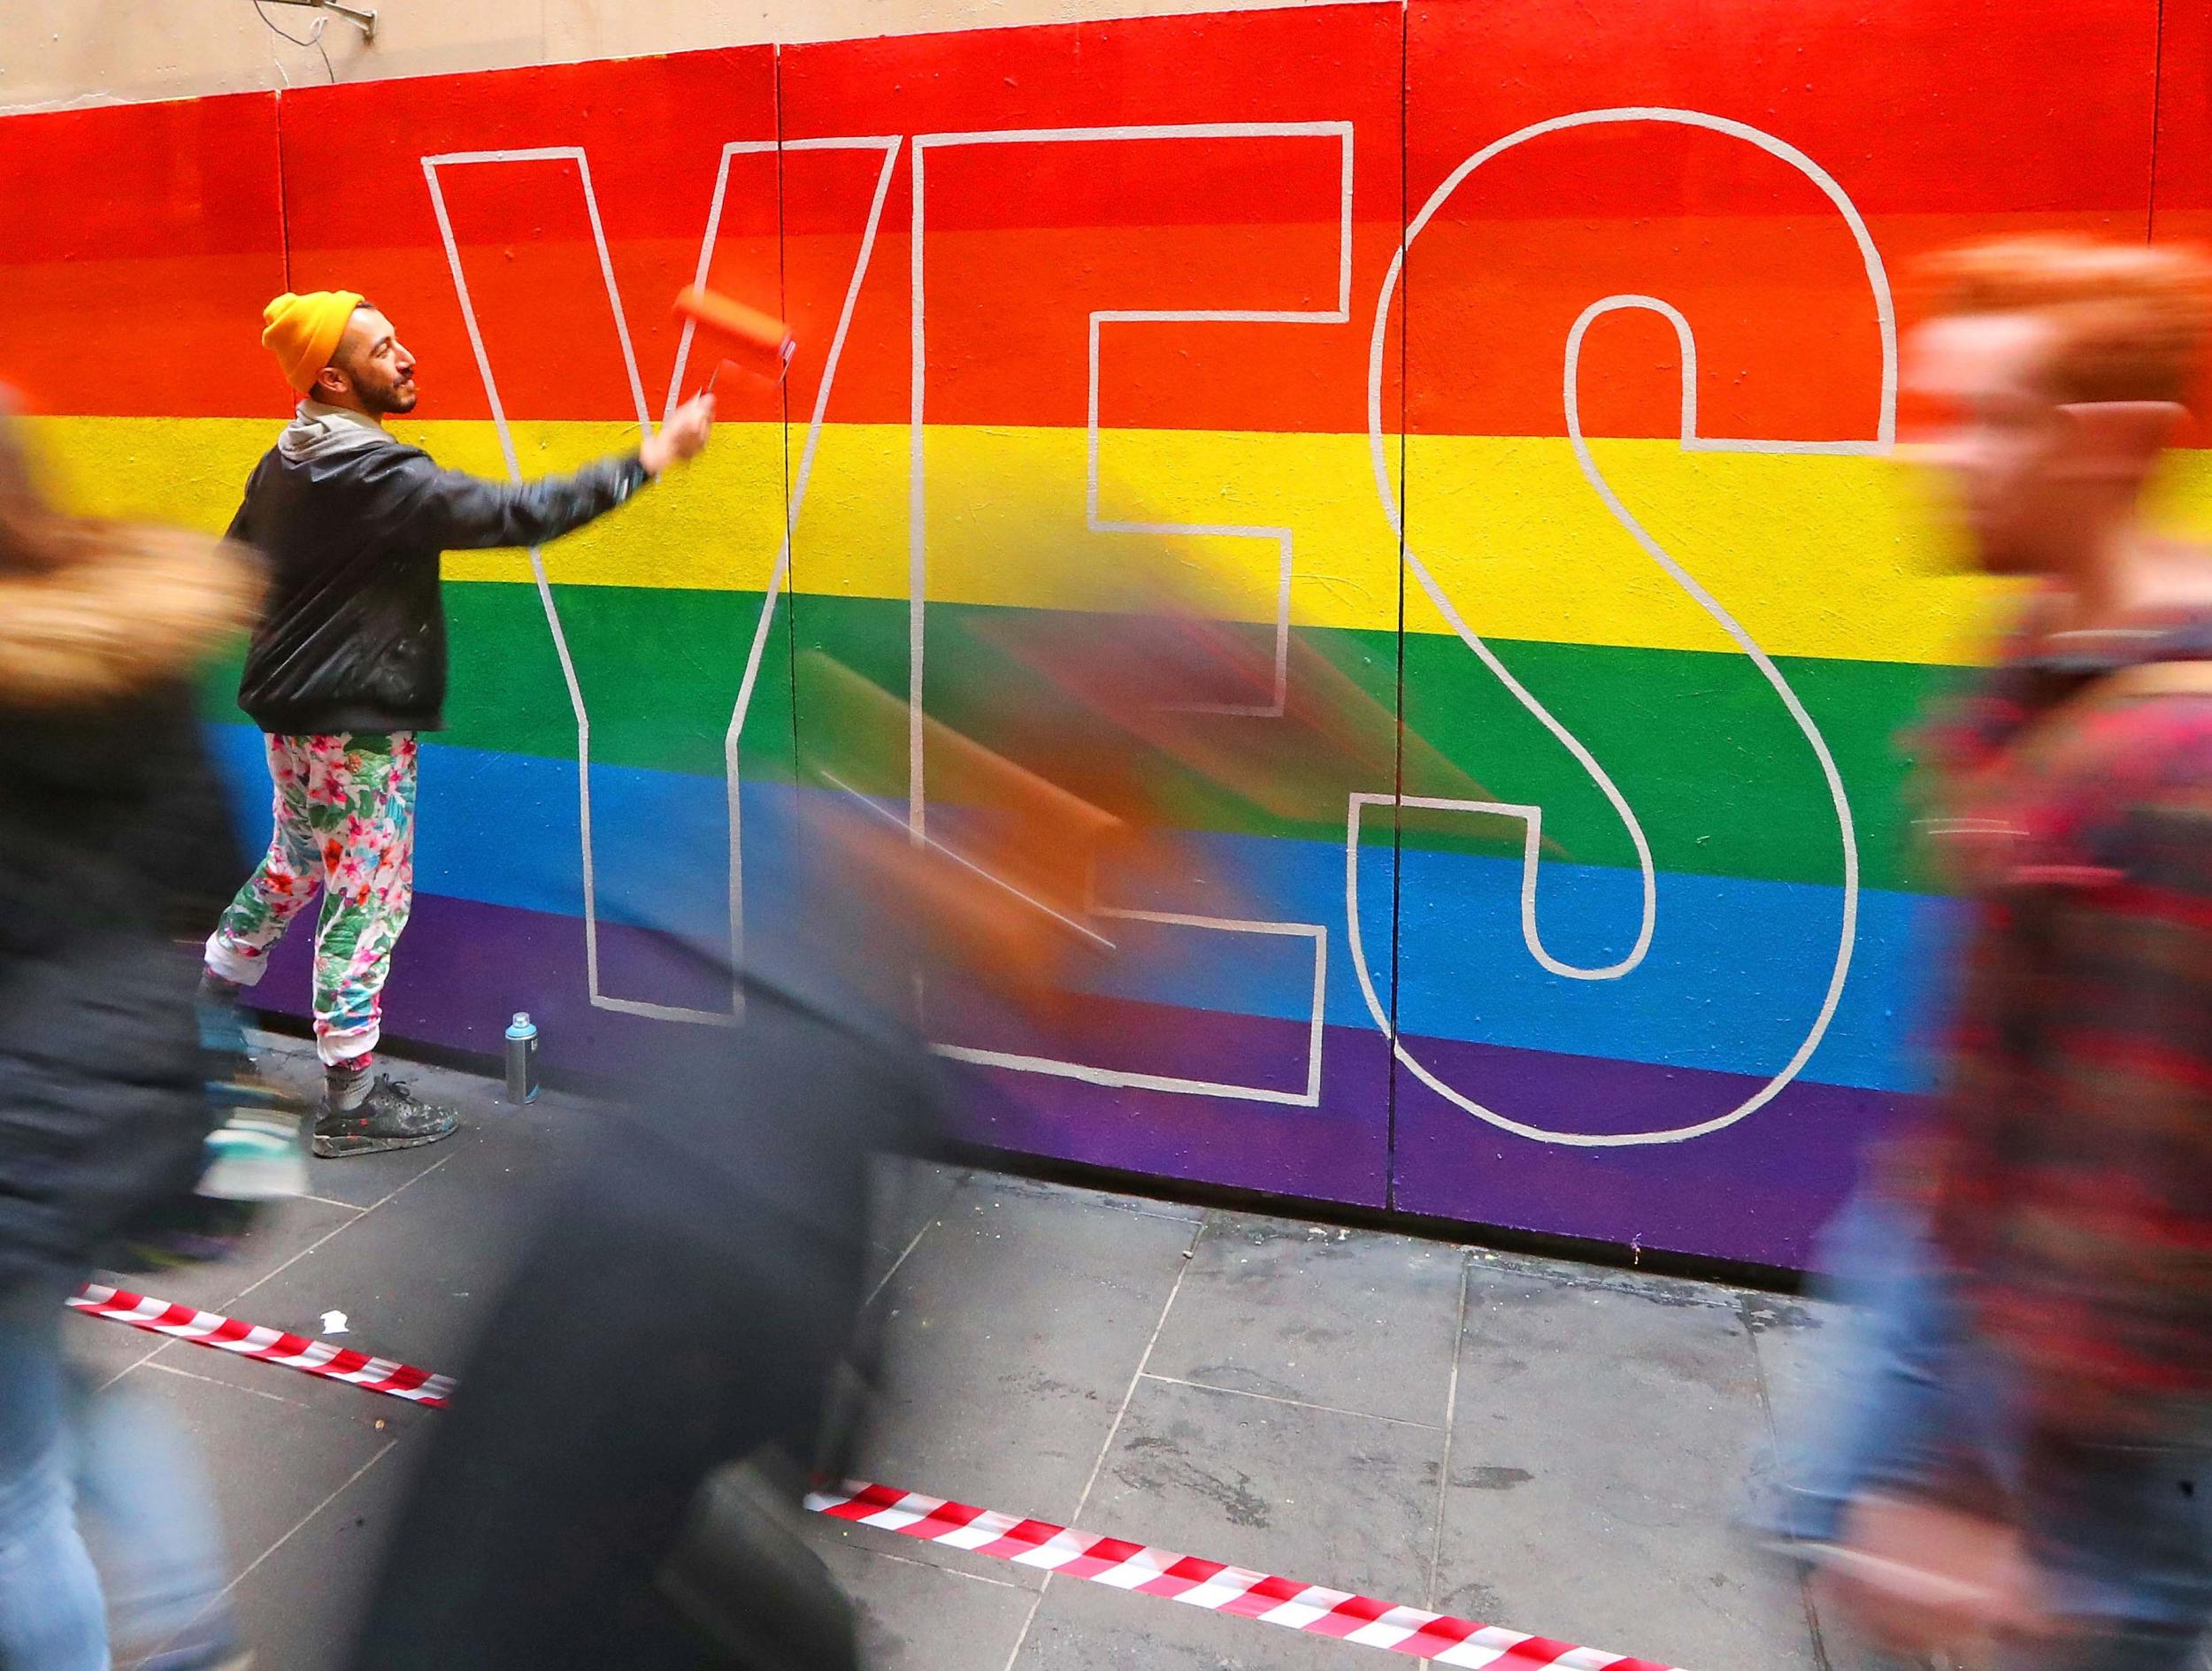 Greater candour in the art world about LGBT+ identity is a reversal of the previous norm